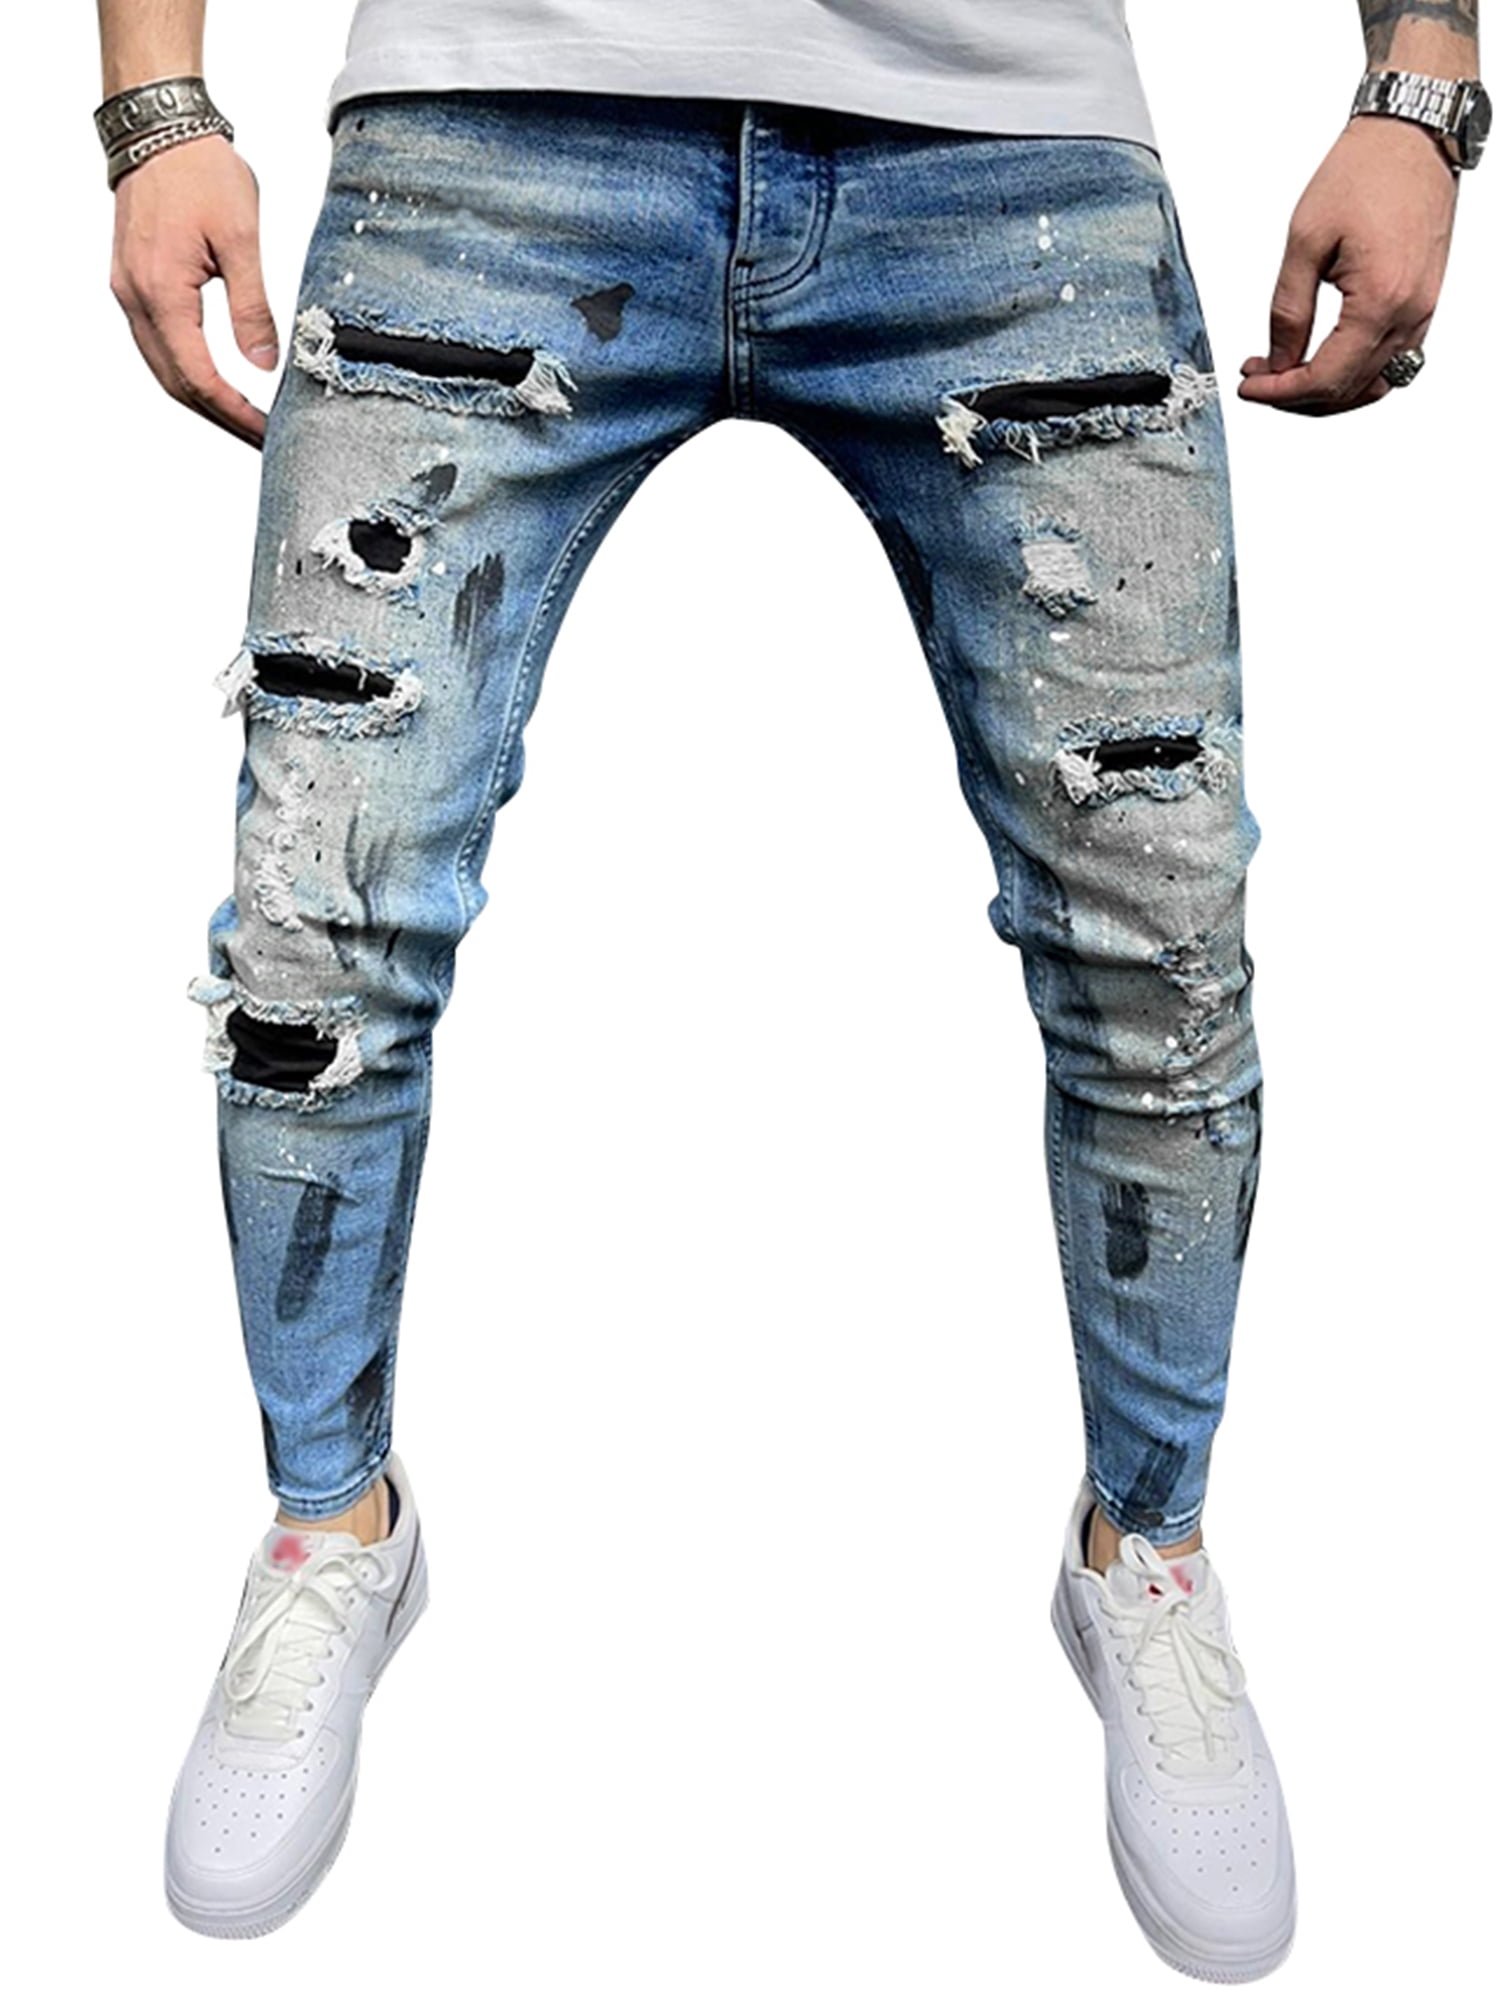 Stitching Jeans | Motorcycle Pant - Retro Street Hole Jeans Men Pant Hip  Hop Ripped - Aliexpress